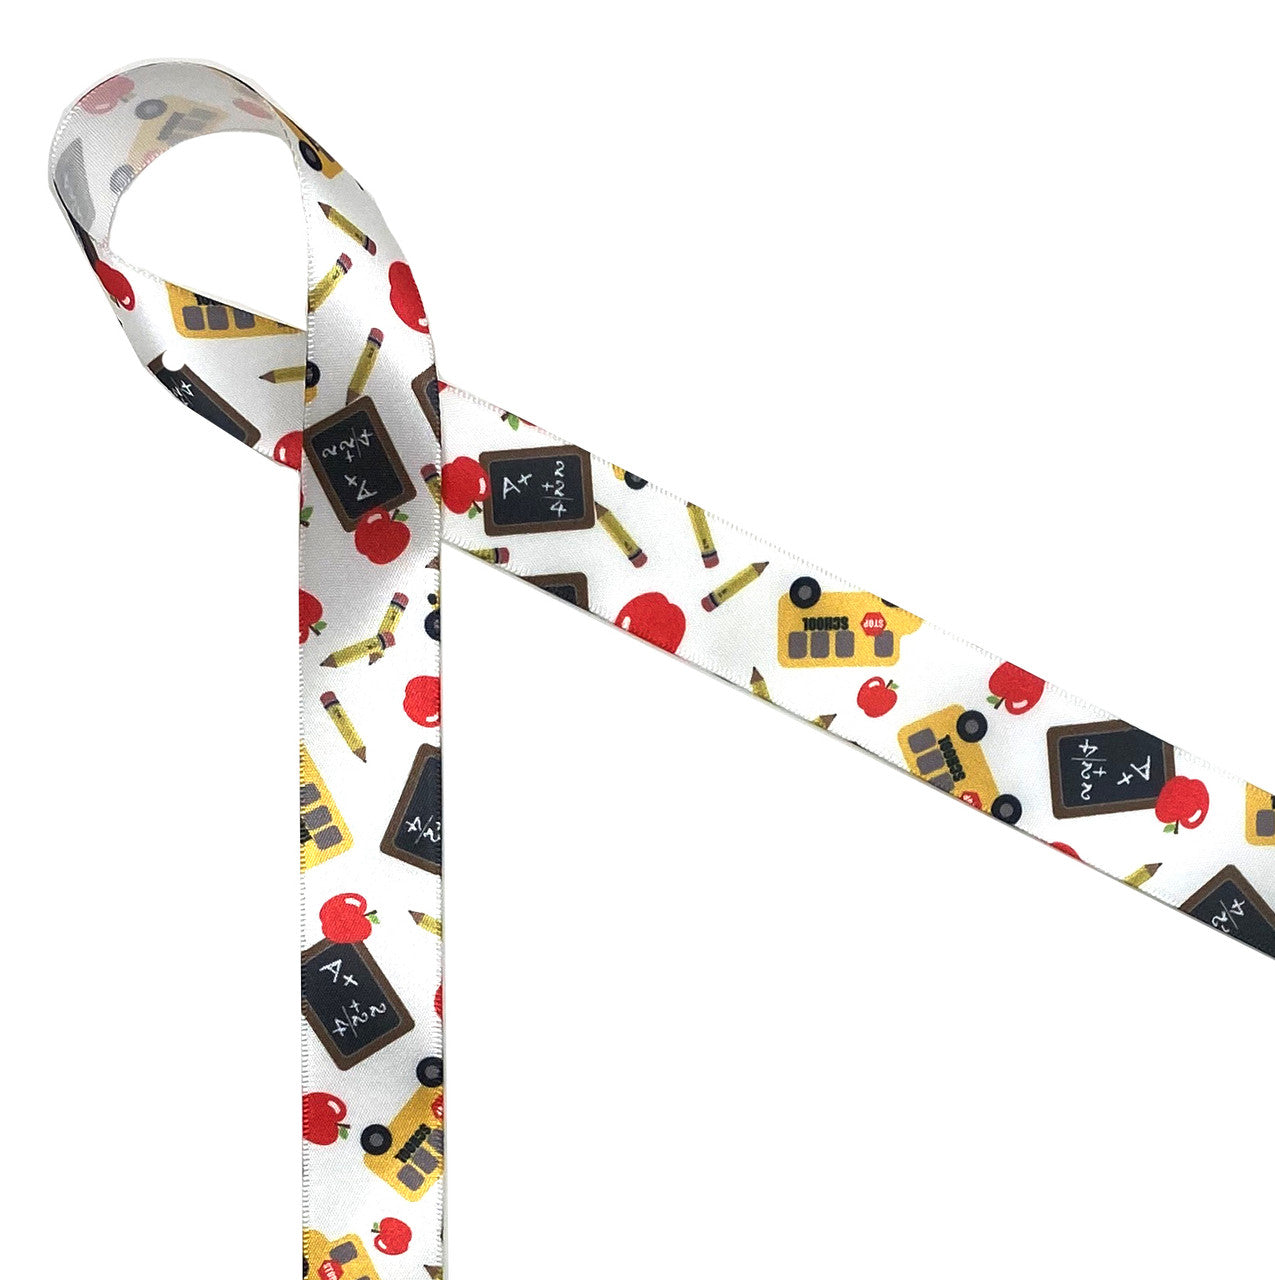 Back to School on 5/8" white single face satin features school buses, black boards, pencils and an apple for the teacher! This is an ideal ribbon for teacher appreciation week, gift wrap, party favors, party decor, quilting and crafts1 Designed and printed in the USA.